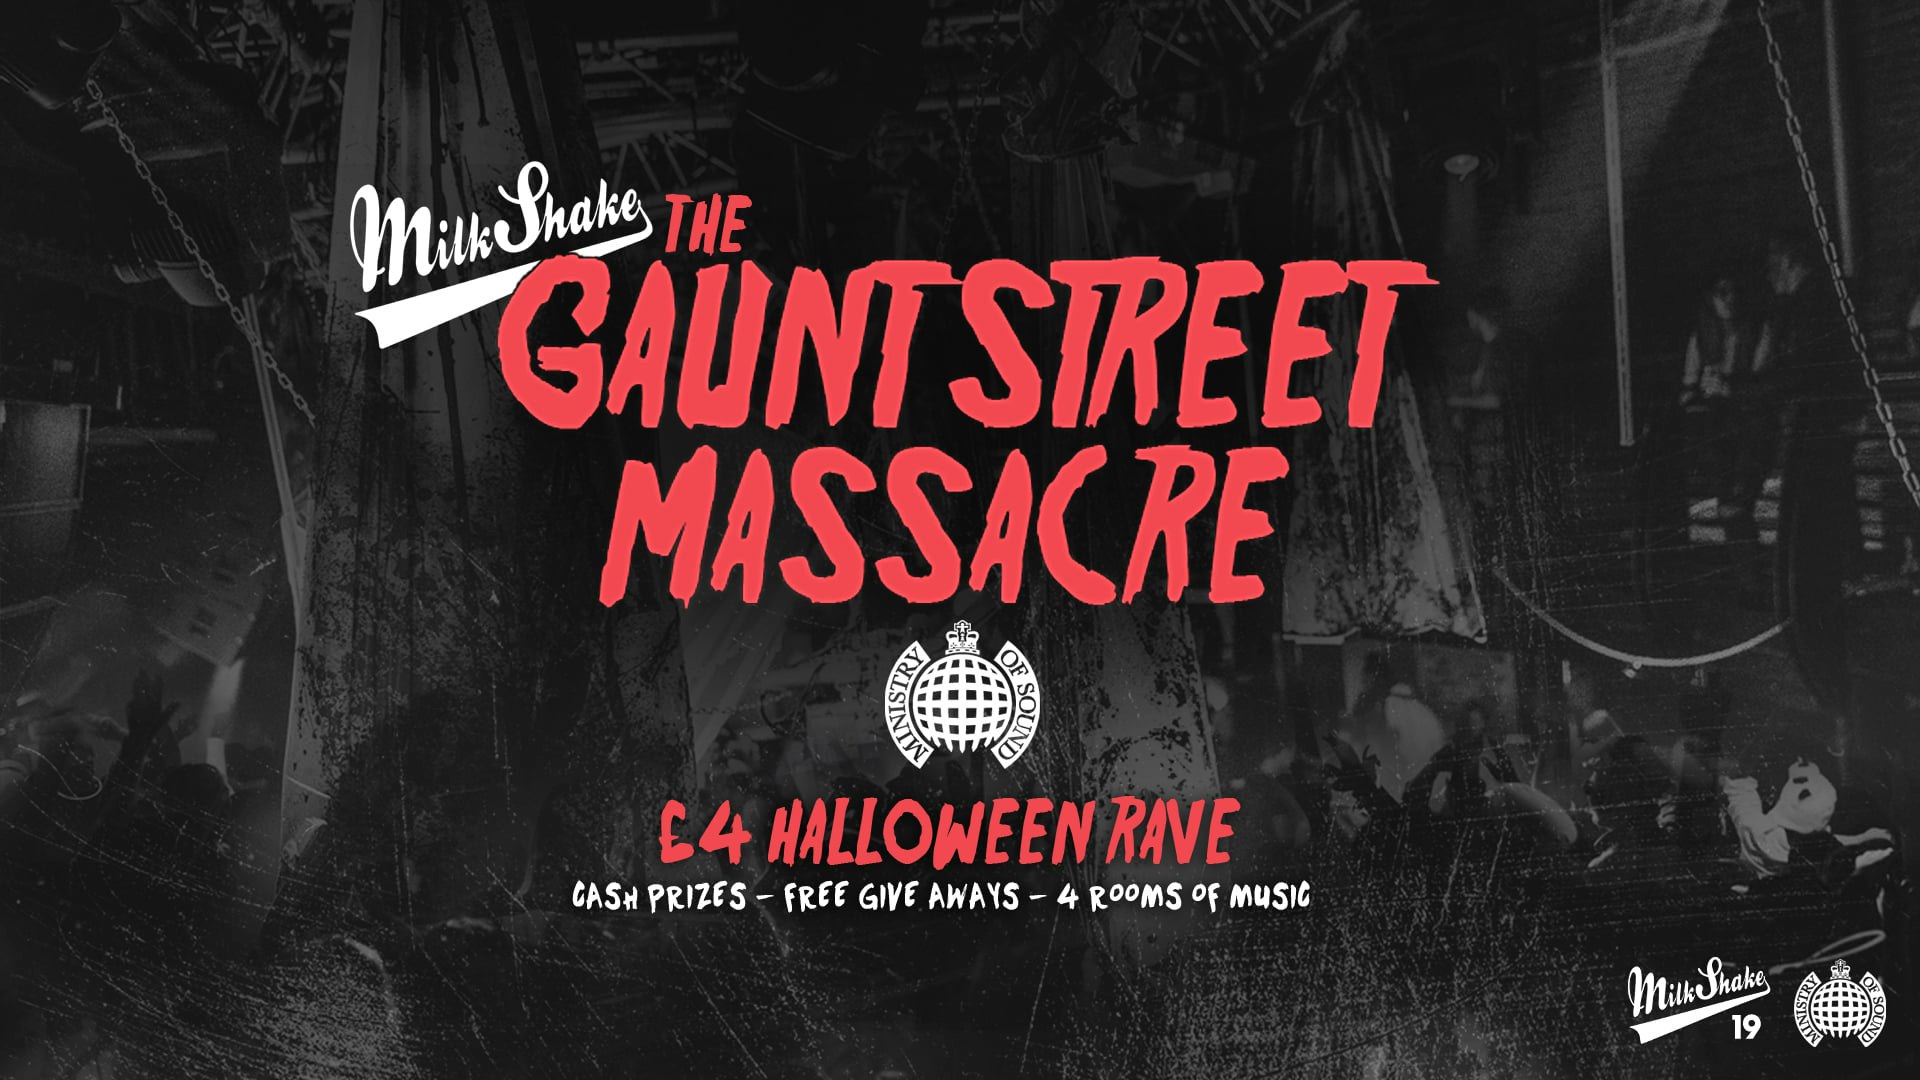 🚫 SOLD OUT 🚫 The Gaunt Street Massacre 2023 👻 – Milkshake, Ministry of Sound – Halloween Rave! 🚫 SOLD OUT 🚫